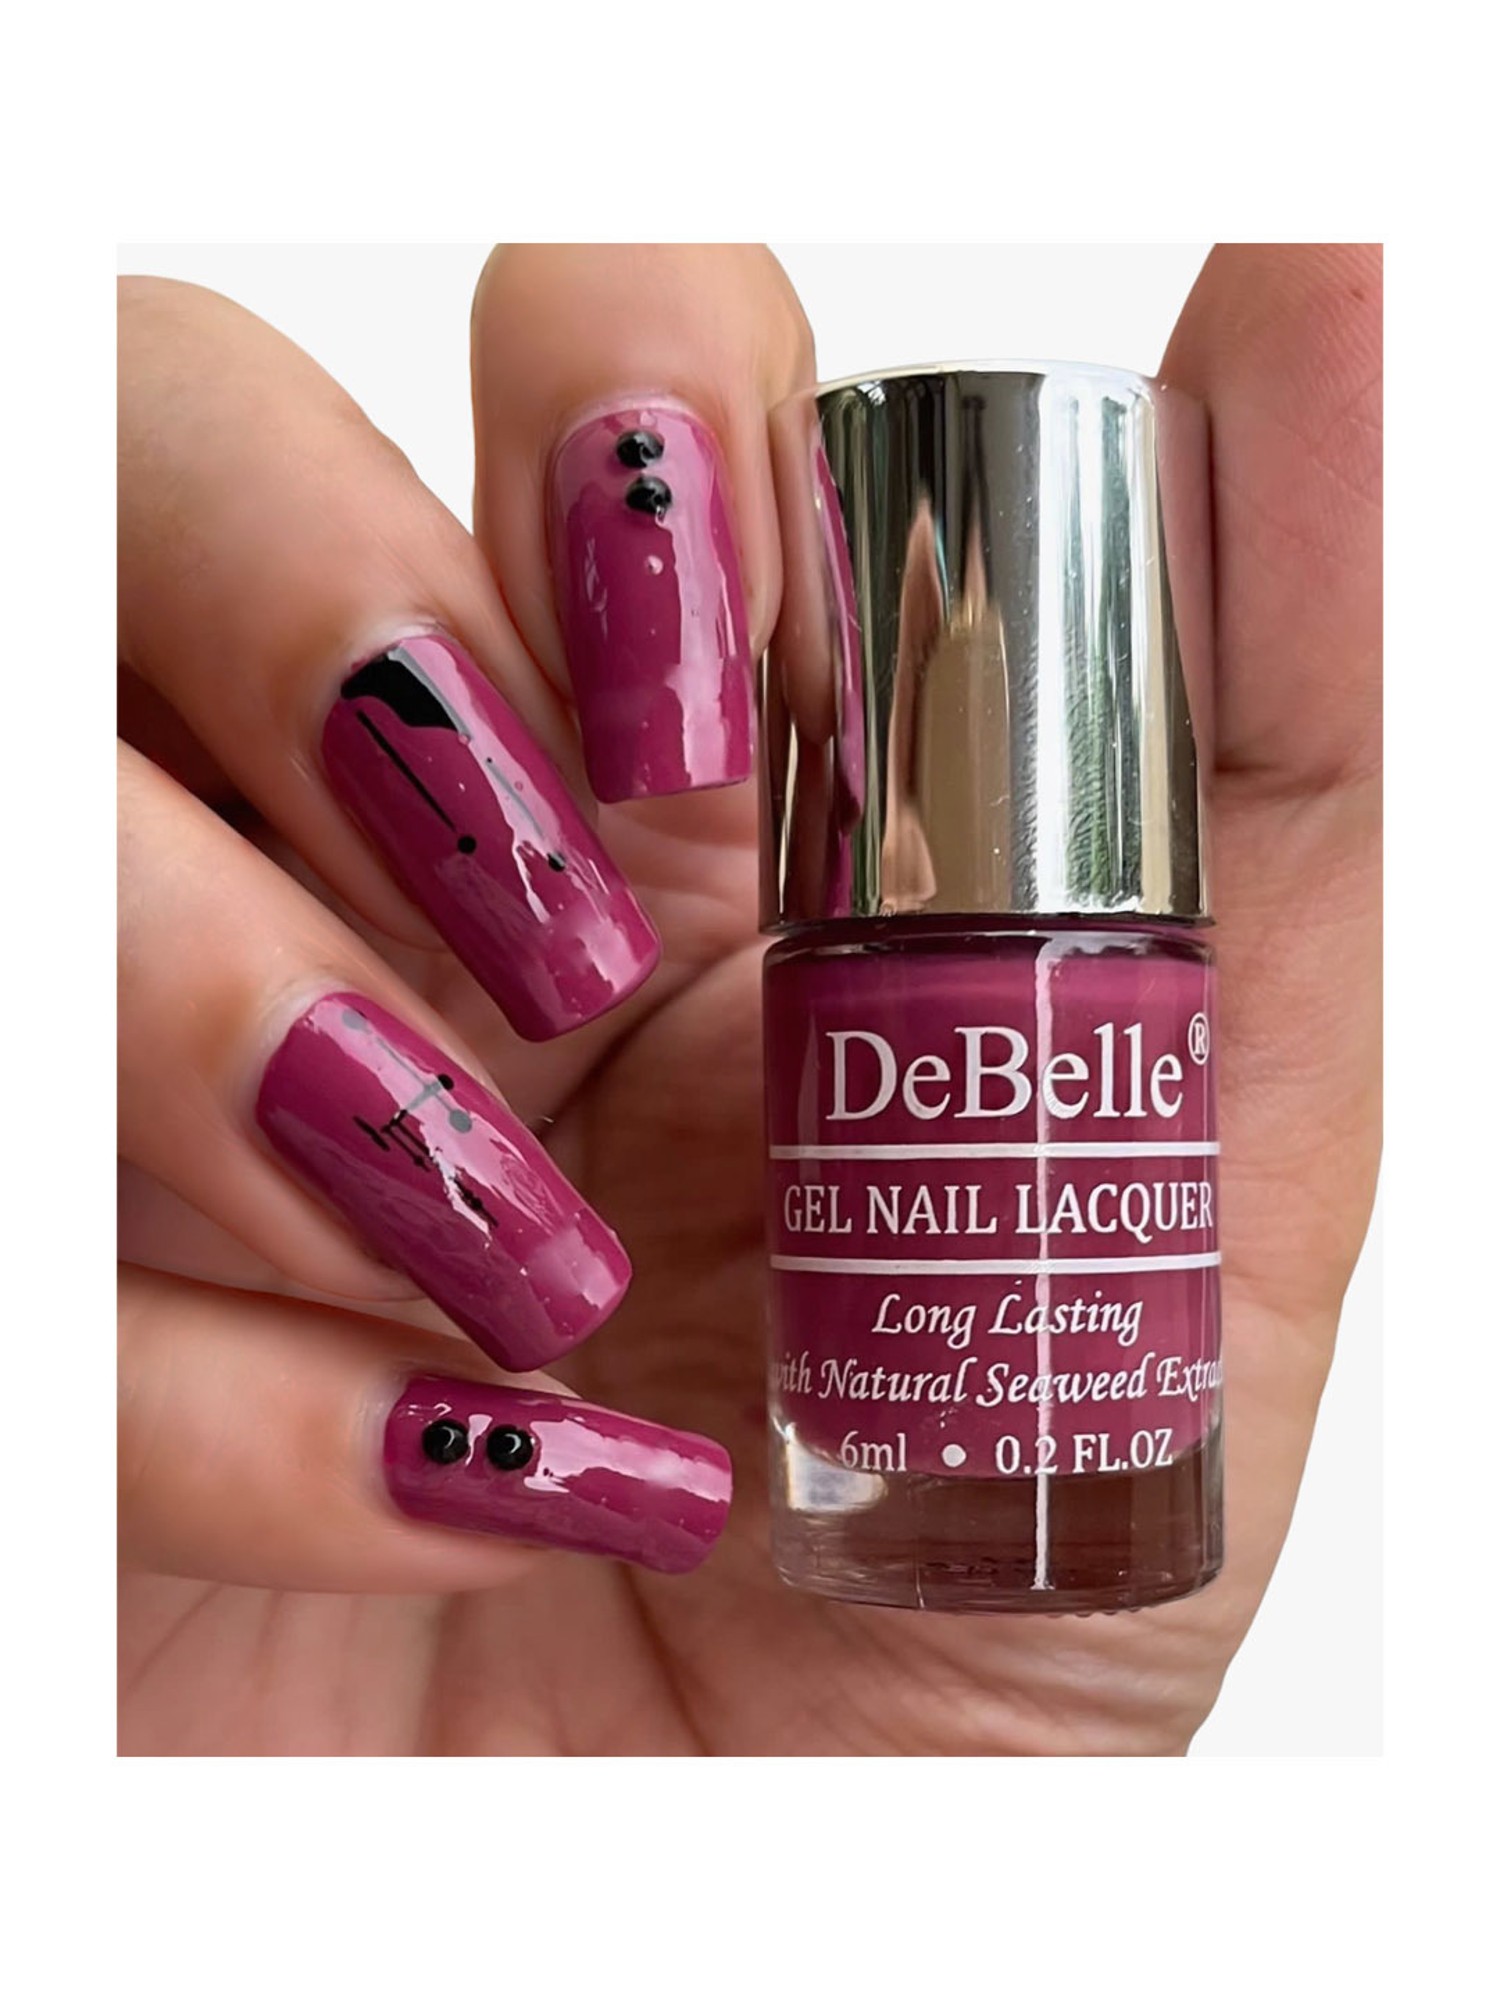 DeBelle Gel Nail Lacquer Reviews Online | Nykaa